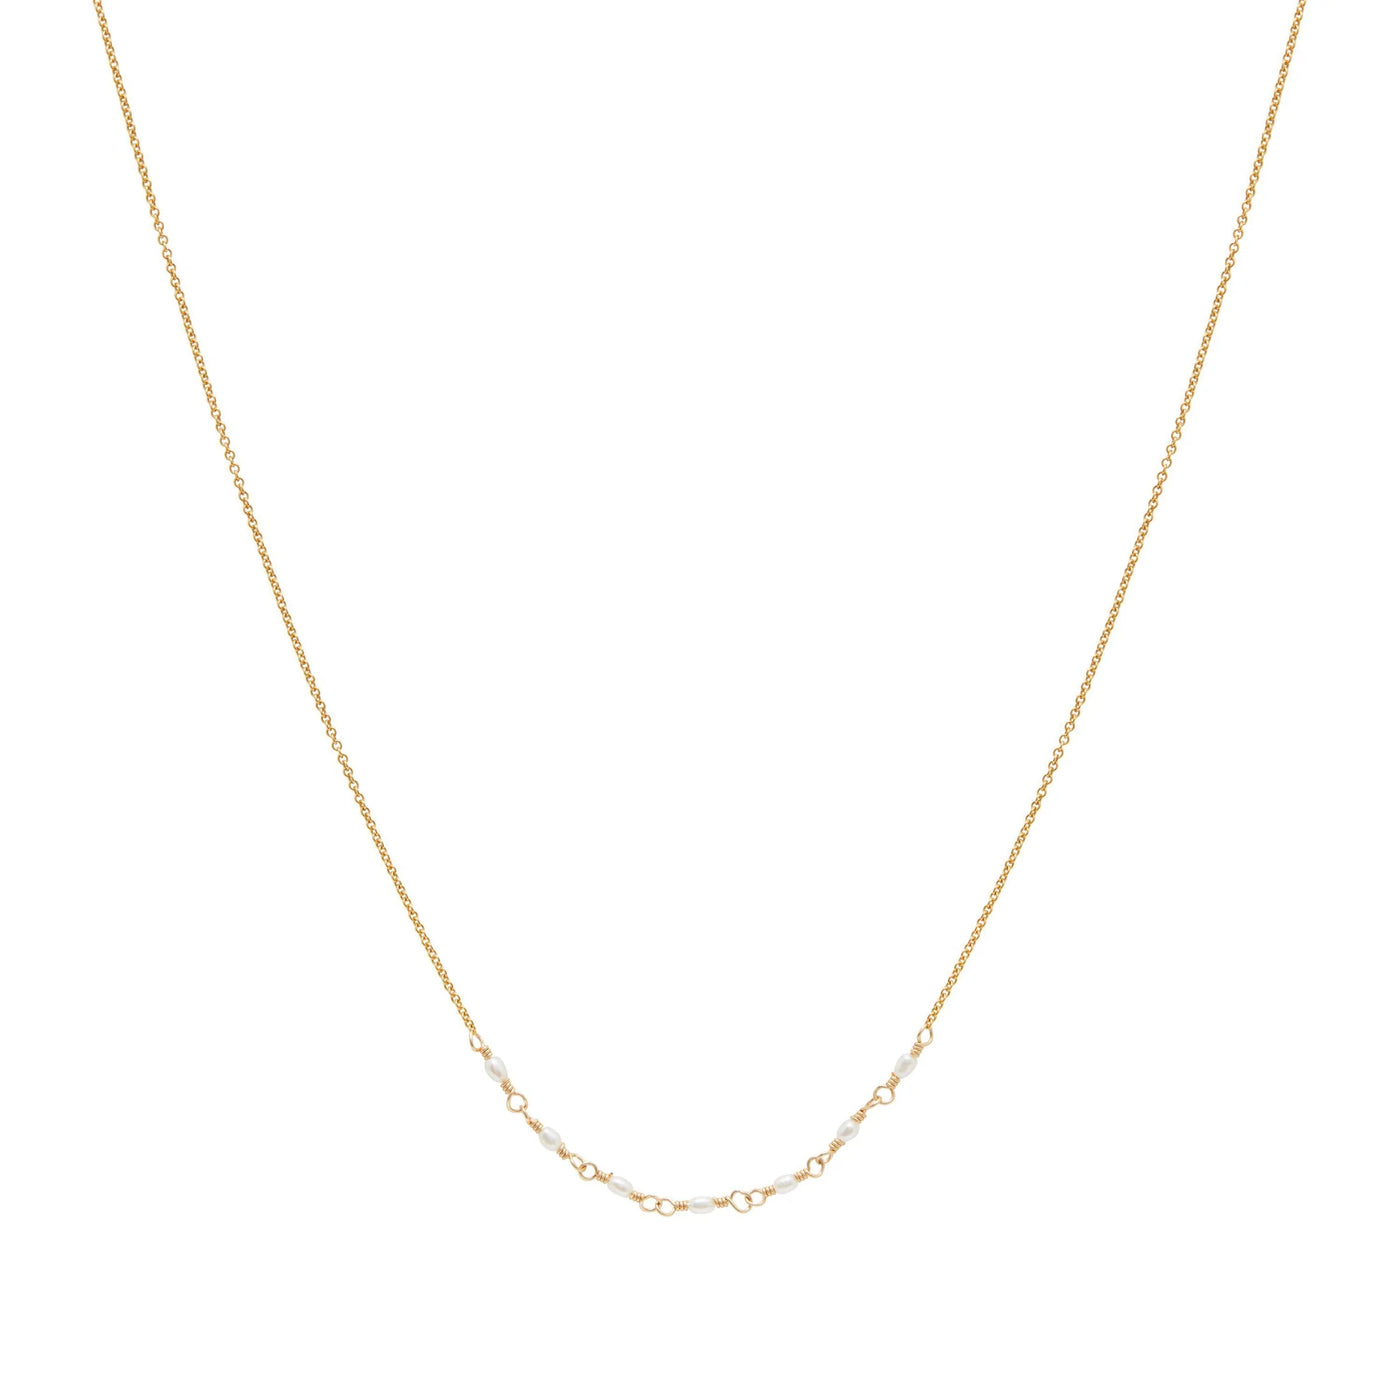 Alana Maria Emme Freshwater Pearl Necklace, Gold